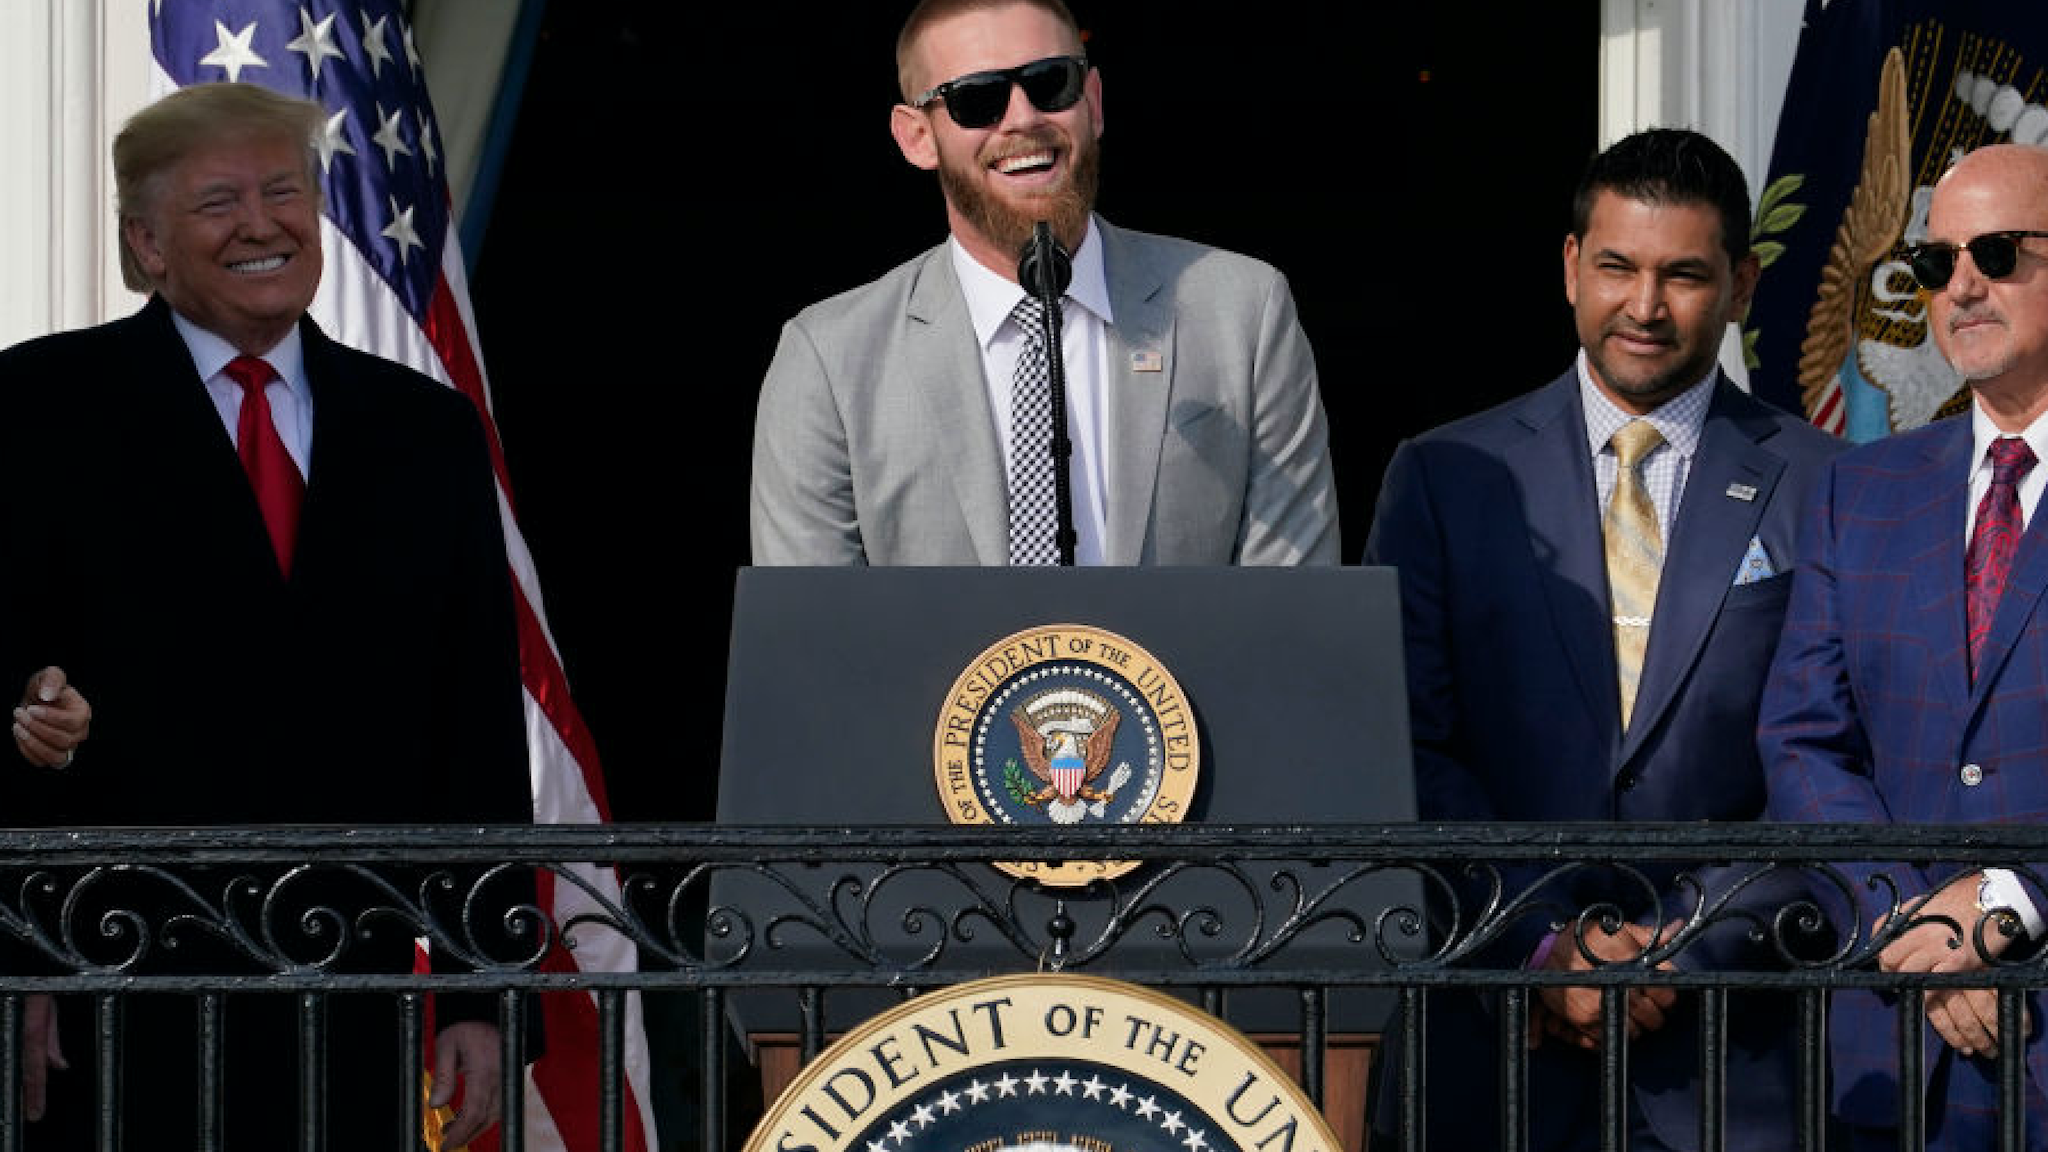 Pitcher Stephen Strasburg (2nd L) speaks as U.S. President Donald Trump (L) welcomes the 2019 World Series Champions, the Washington Nationals, to the White House November 4, 2019 in Washington, DC.